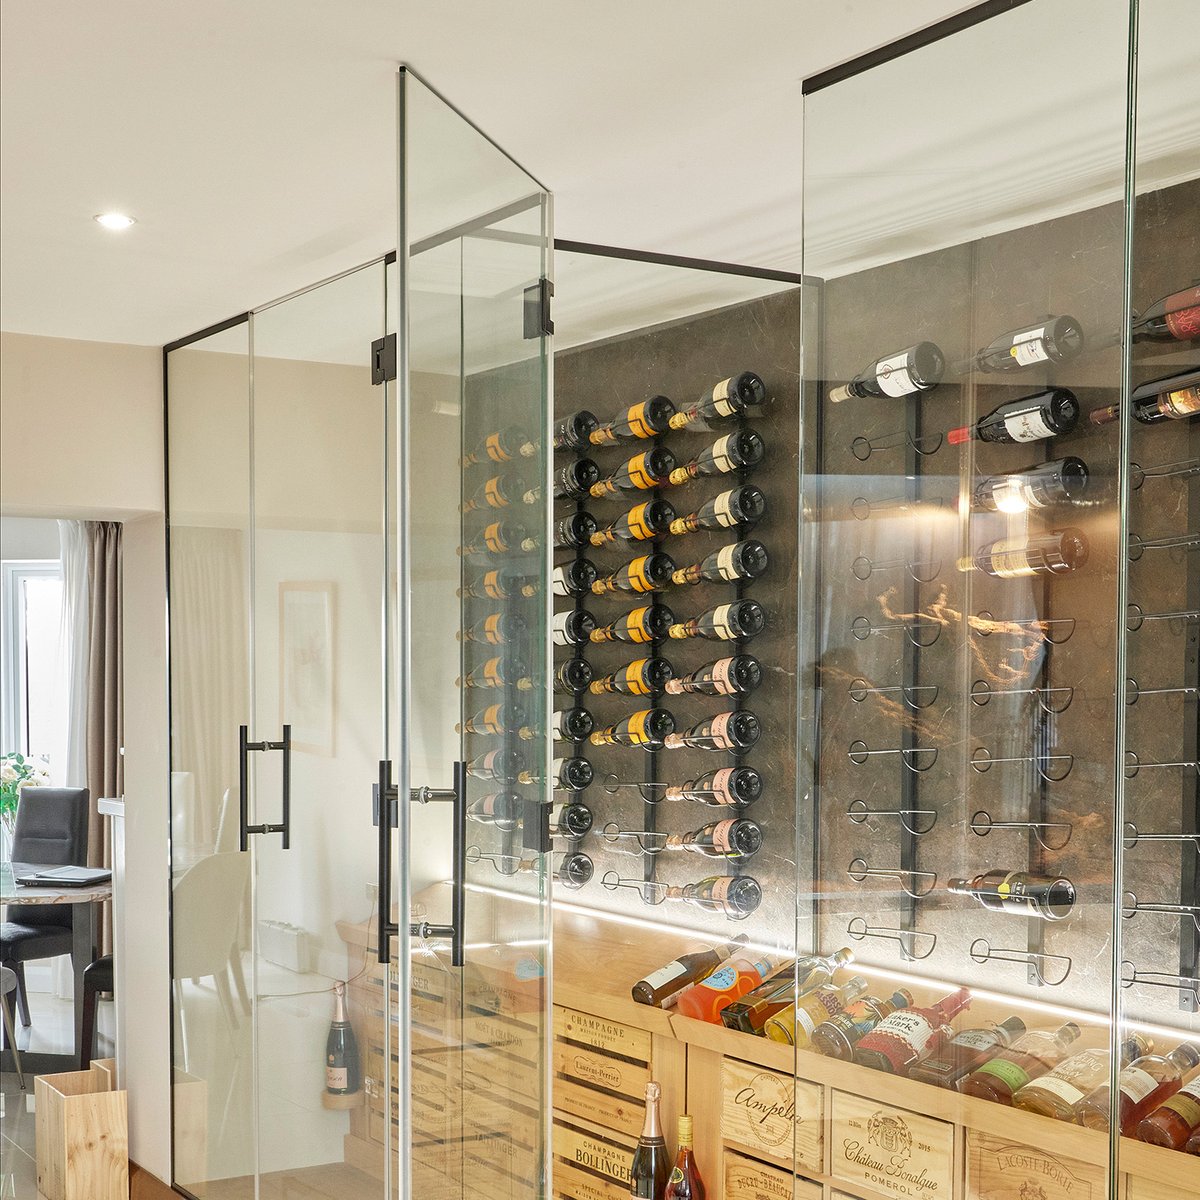 Inalco MDi Umbra was used for the wall cladding in this stunning wine room installed by Glass & Mirror technology, bringing an air of sophistication to the setting. . #wallcladding #wineroom #interiordesign